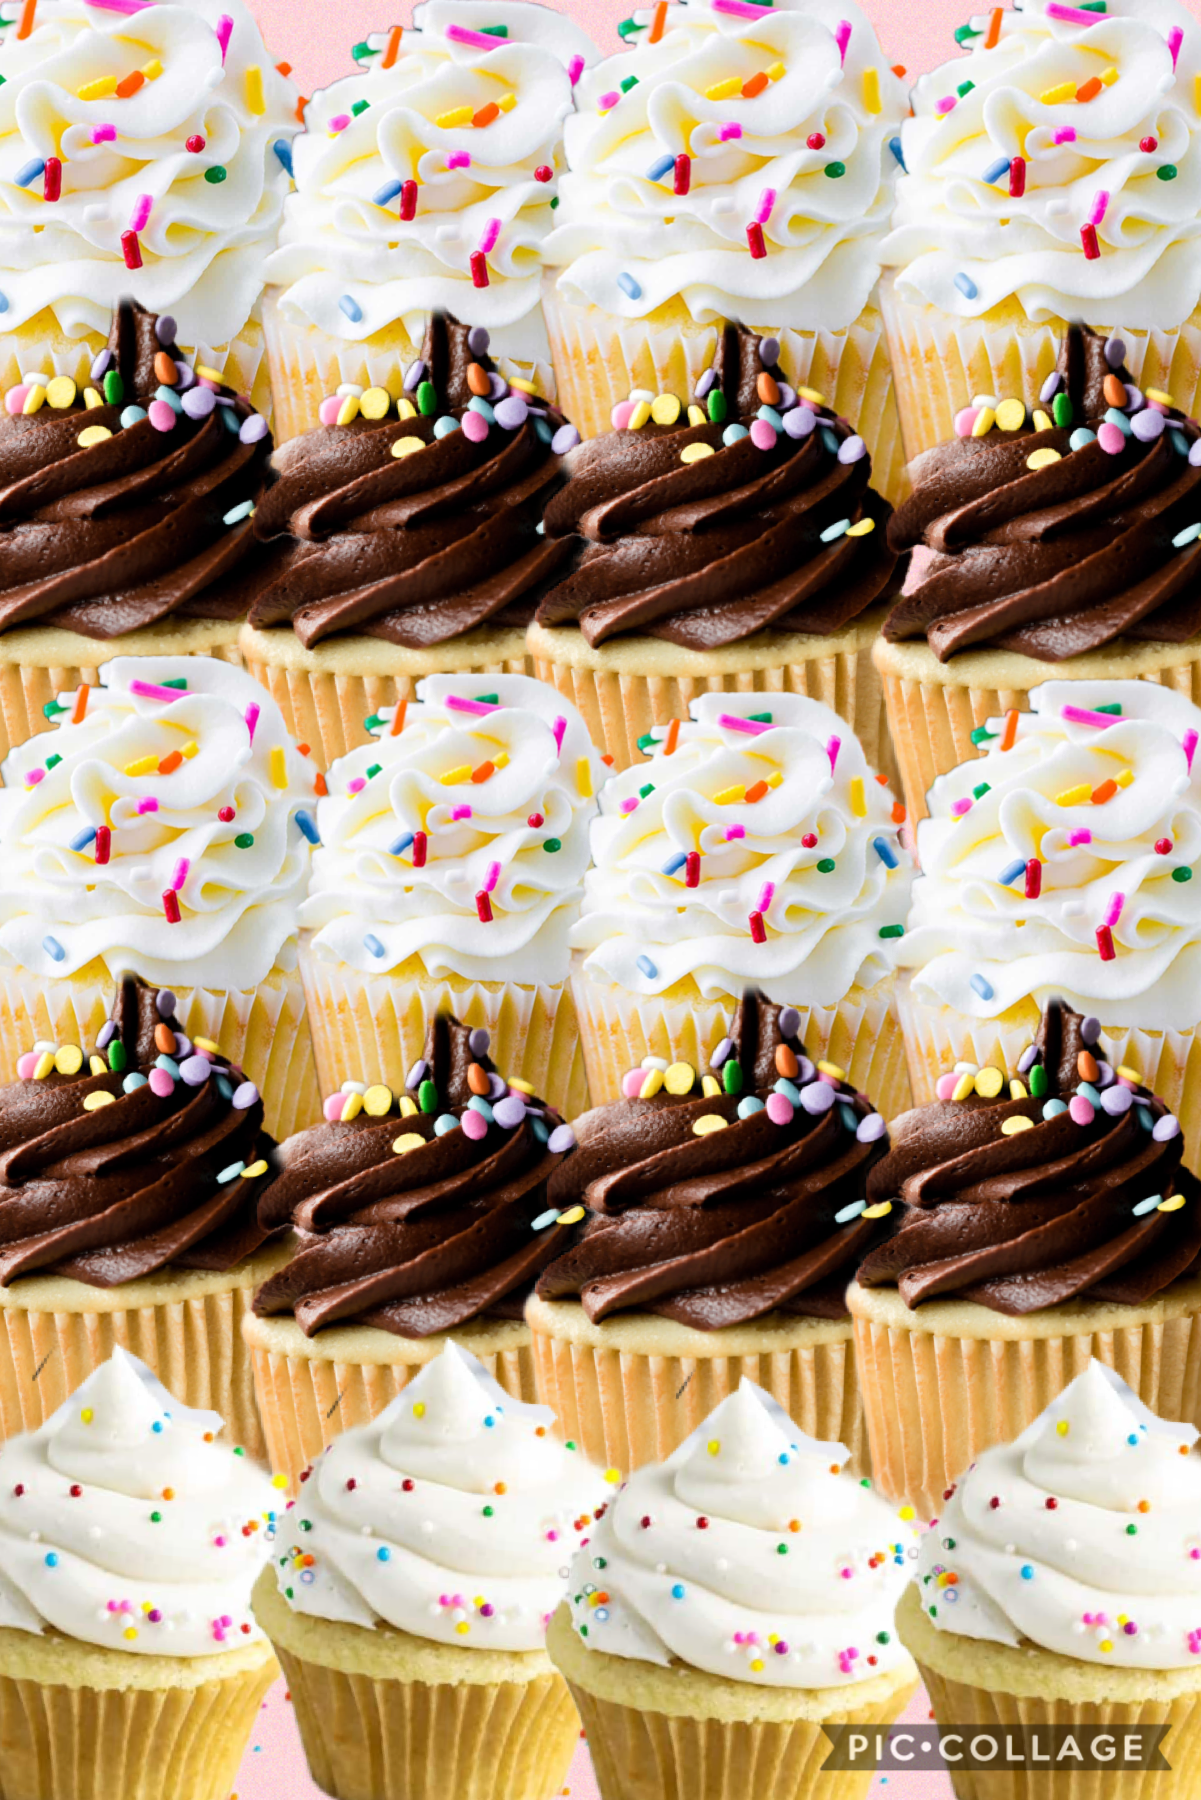 Some hand cutout cupcakes for your wall paper